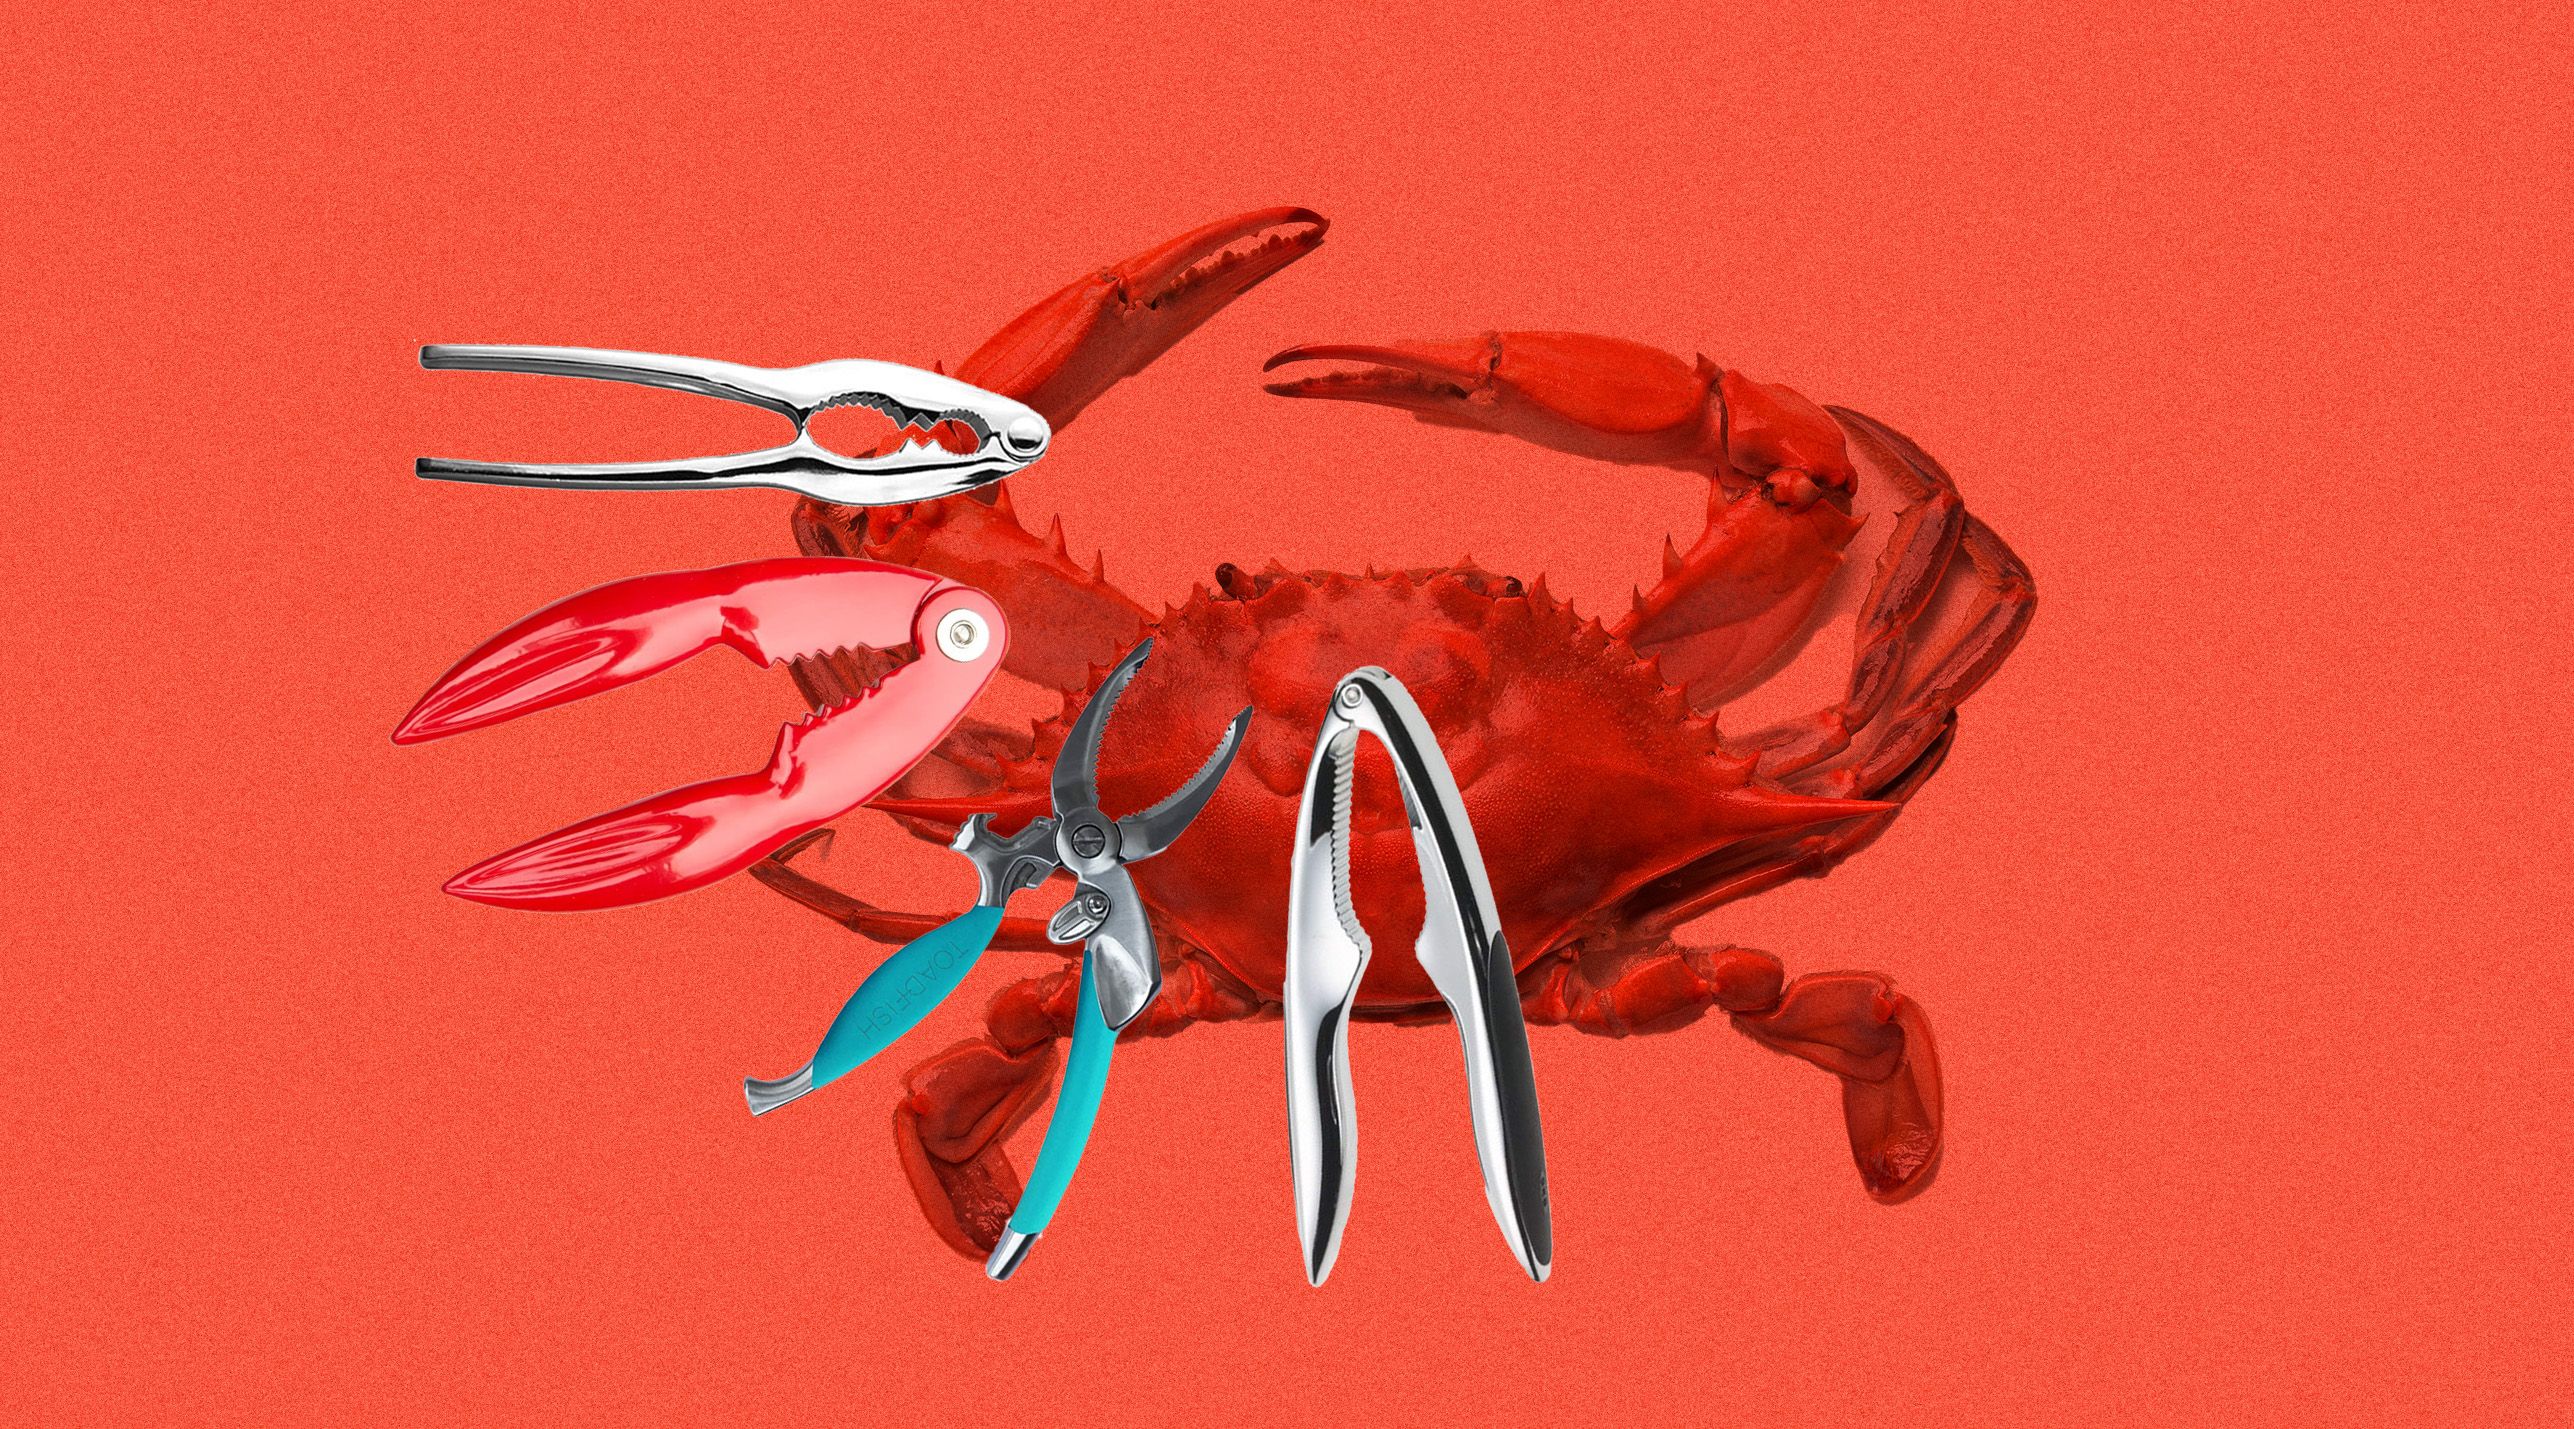 14 x 7 cm Red Crab Claw Tool Red Crab Cracker Crab Claw and Lobster Cracker Sheller Seafood Cracker Shellfish Tool with Black Flannelette Bag 